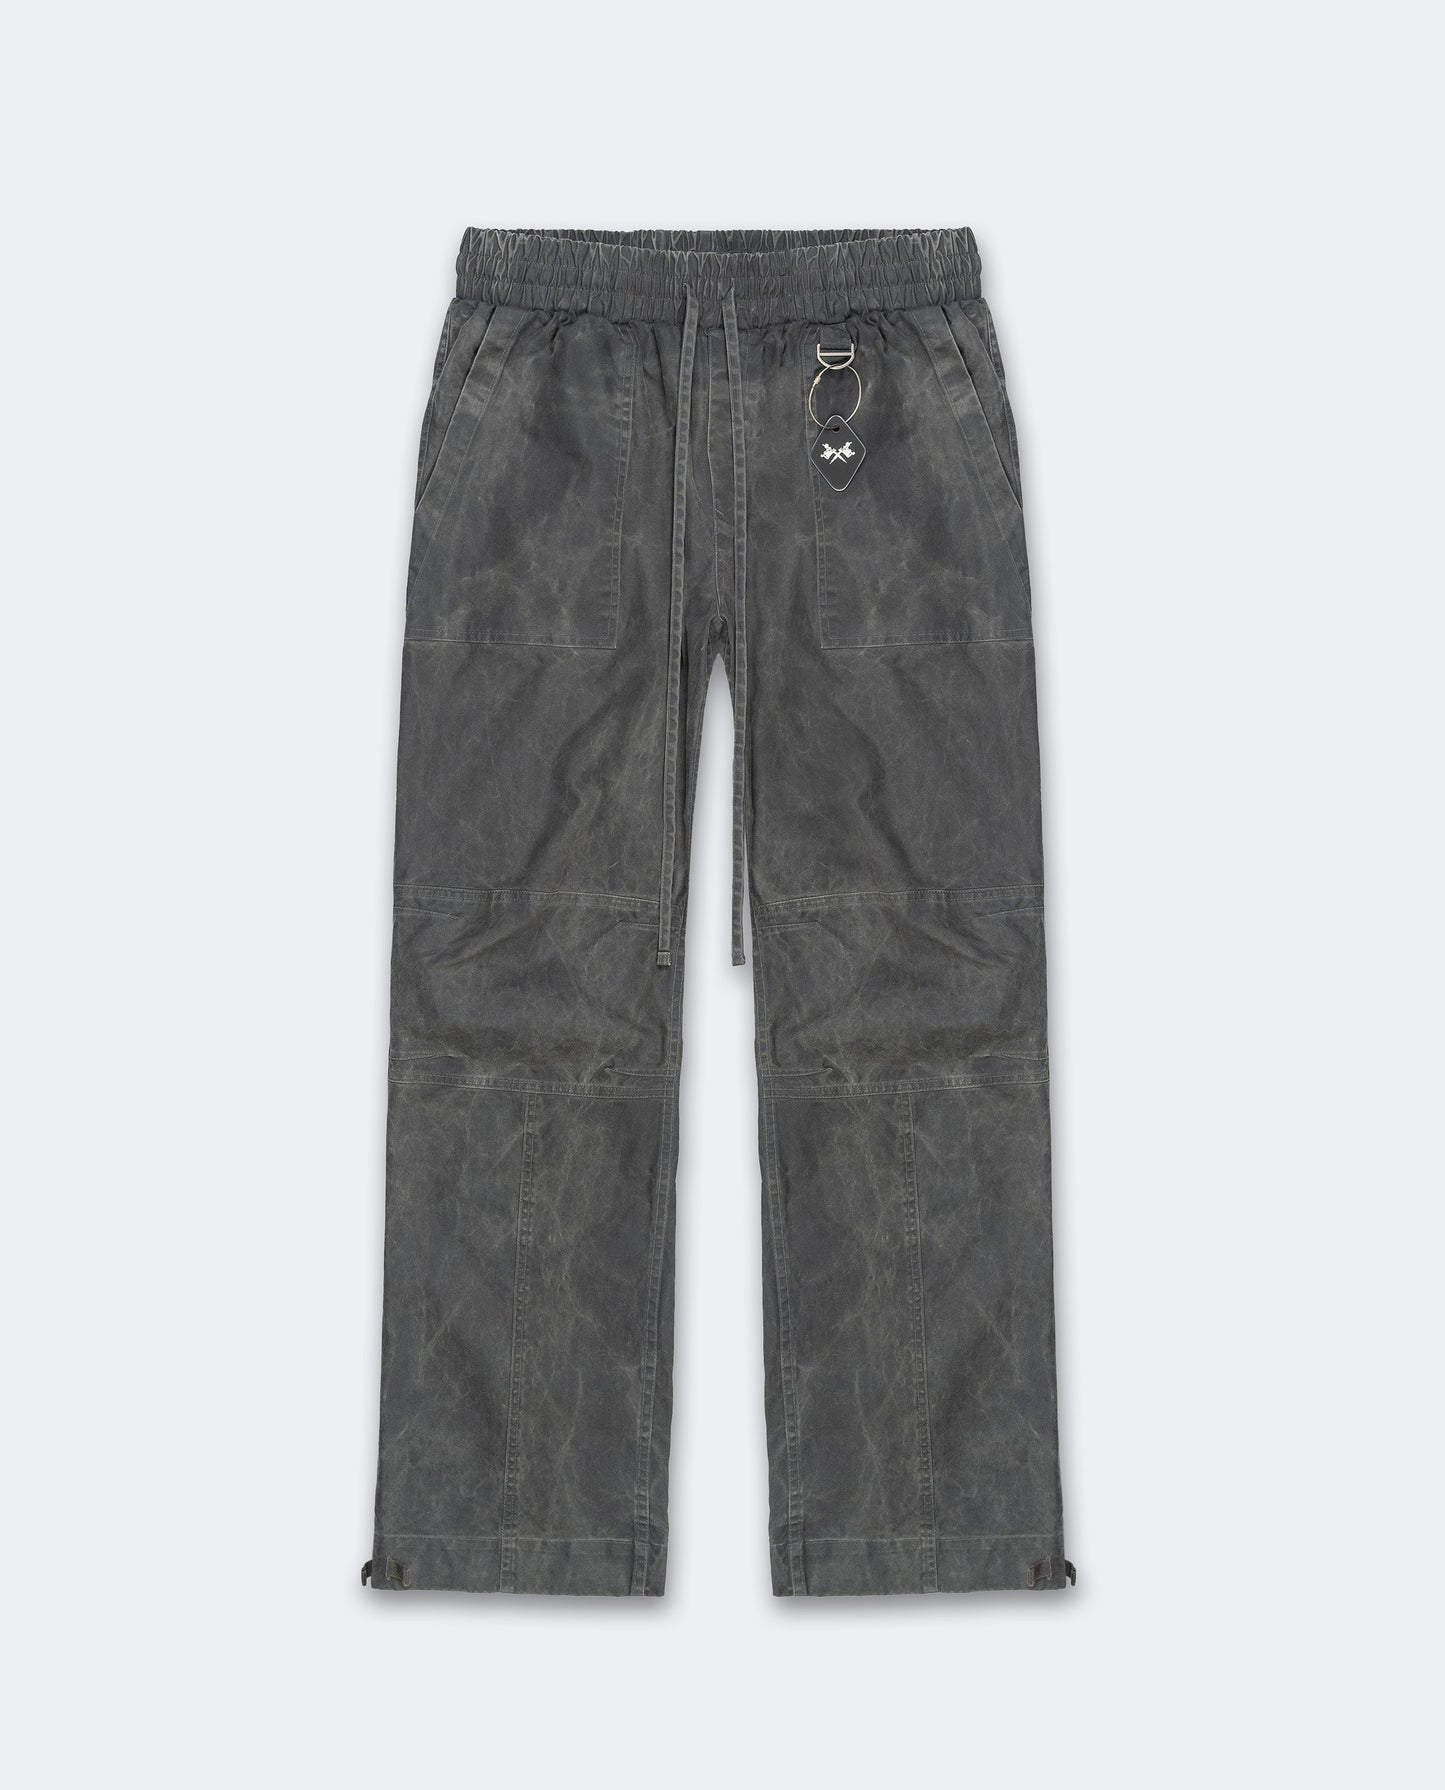 ROOT MILITARY V8.A Pants